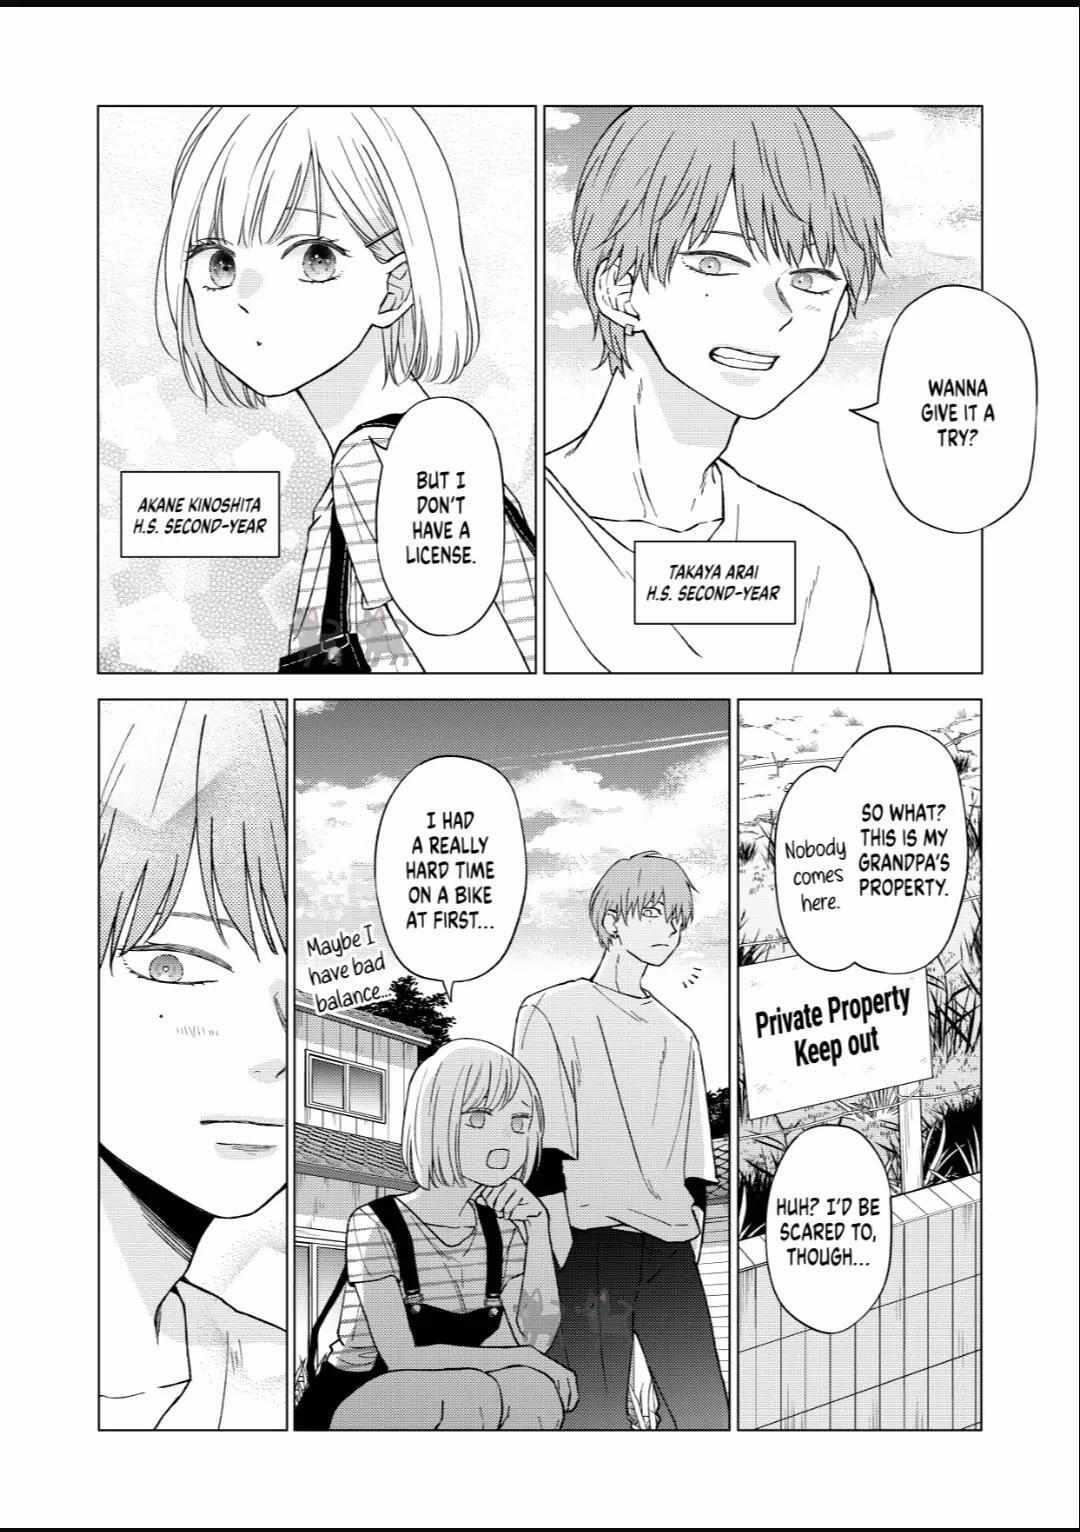 Chapter 102, My Love Story with Yamada-kun at Lv999